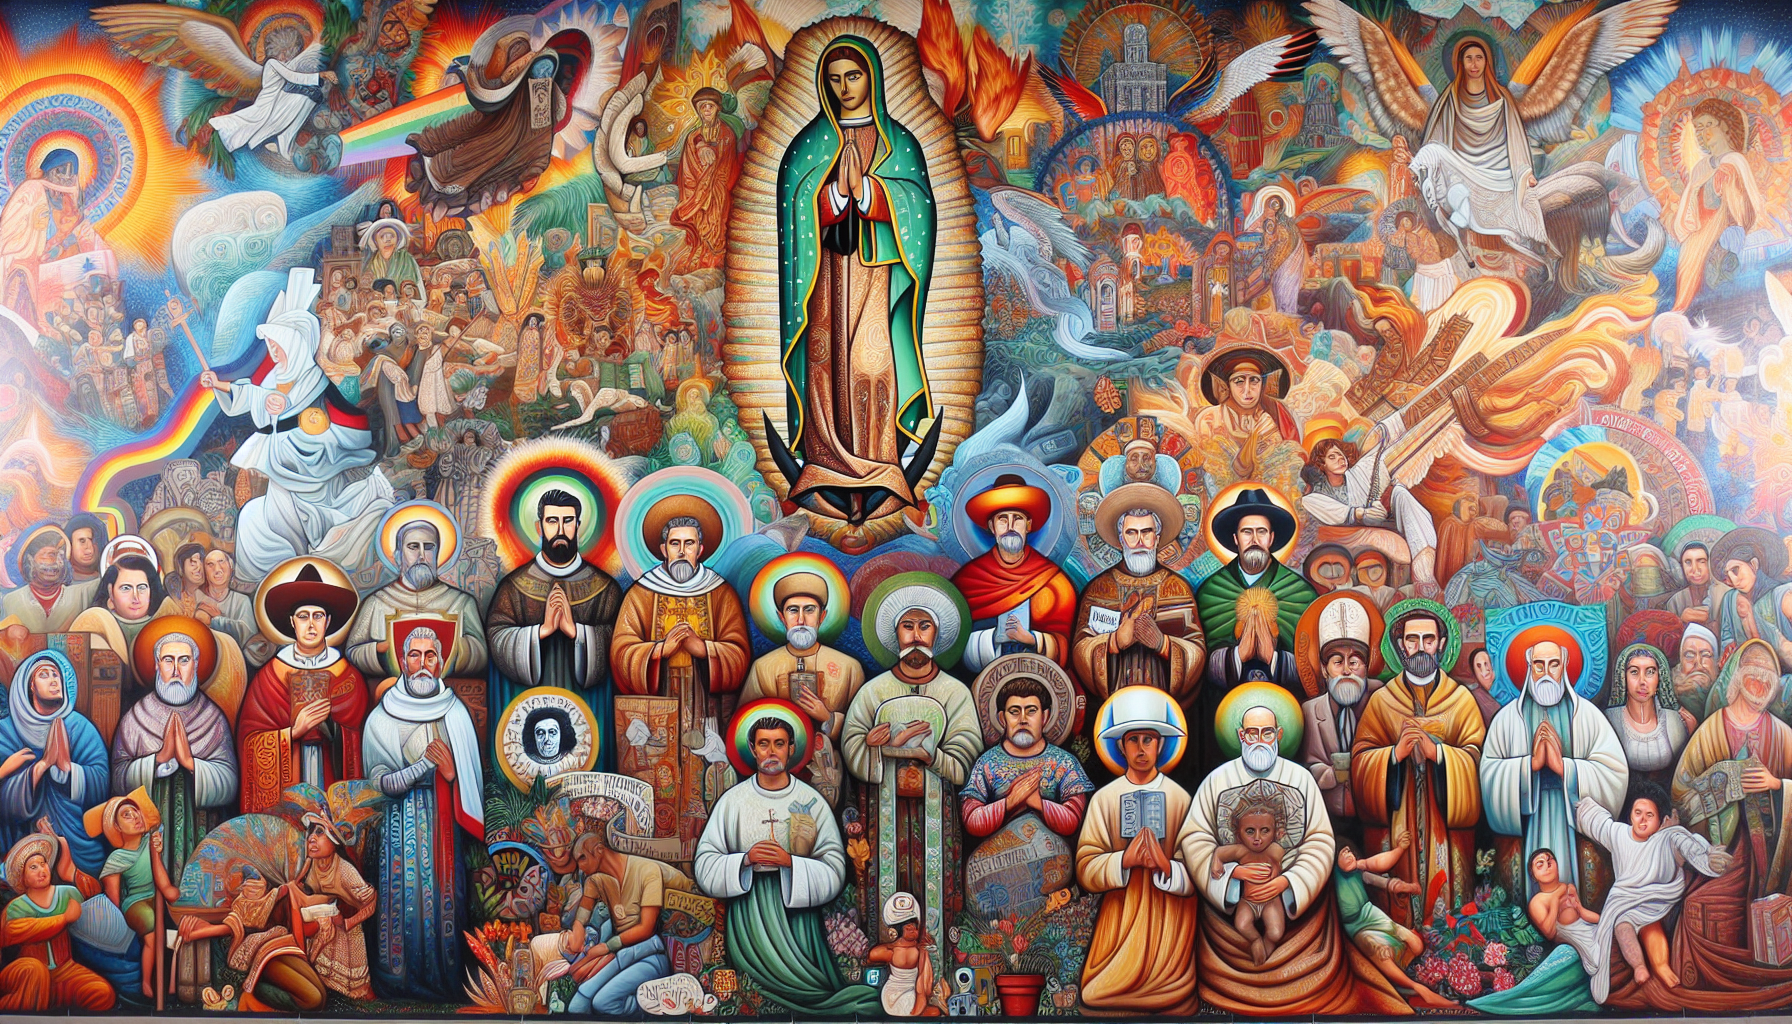 Create an image of a colorful and vibrant mural in Mexico featuring a collection of different Mexican saints, with each saint depicted in a unique and culturally significant way. The mural should show